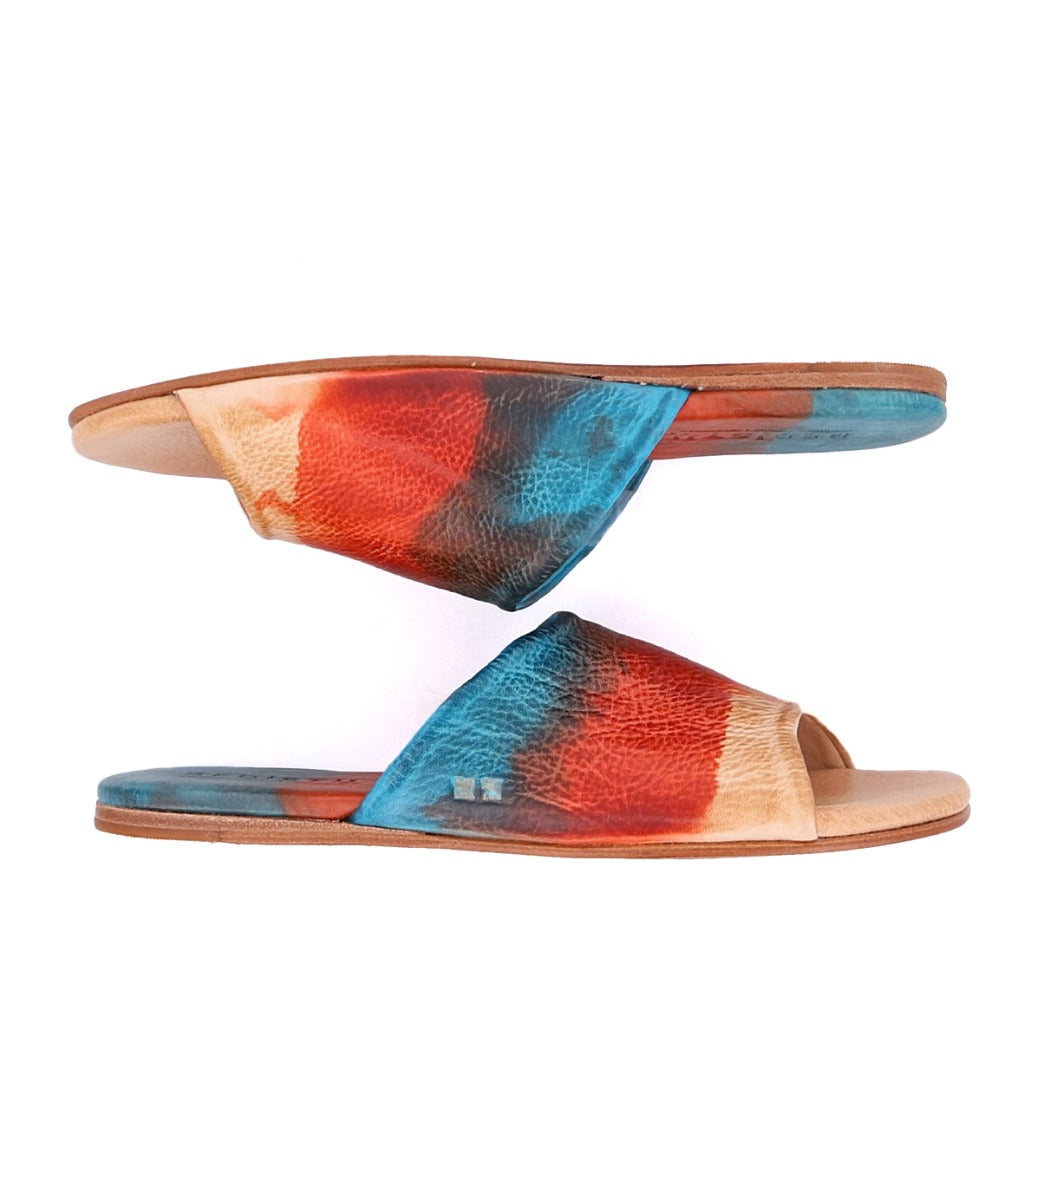 A pair of Gia colorful leather slide on sandals by Bed Stu.